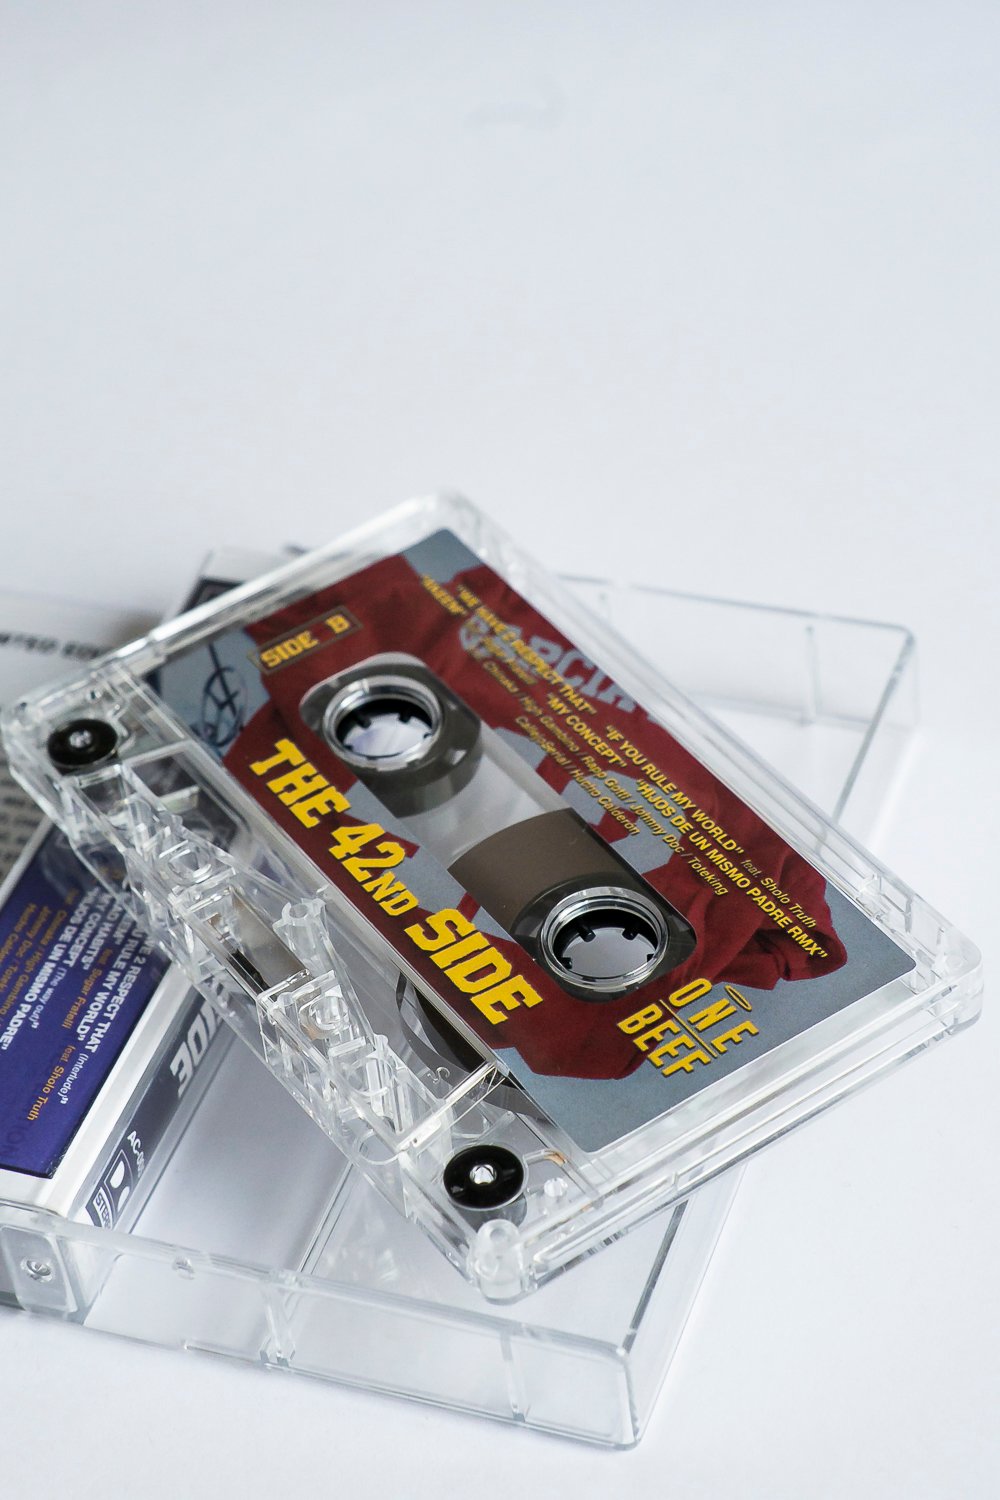 Image of The 42nd Side Cassette by: García Eneh & Lord High executioner.